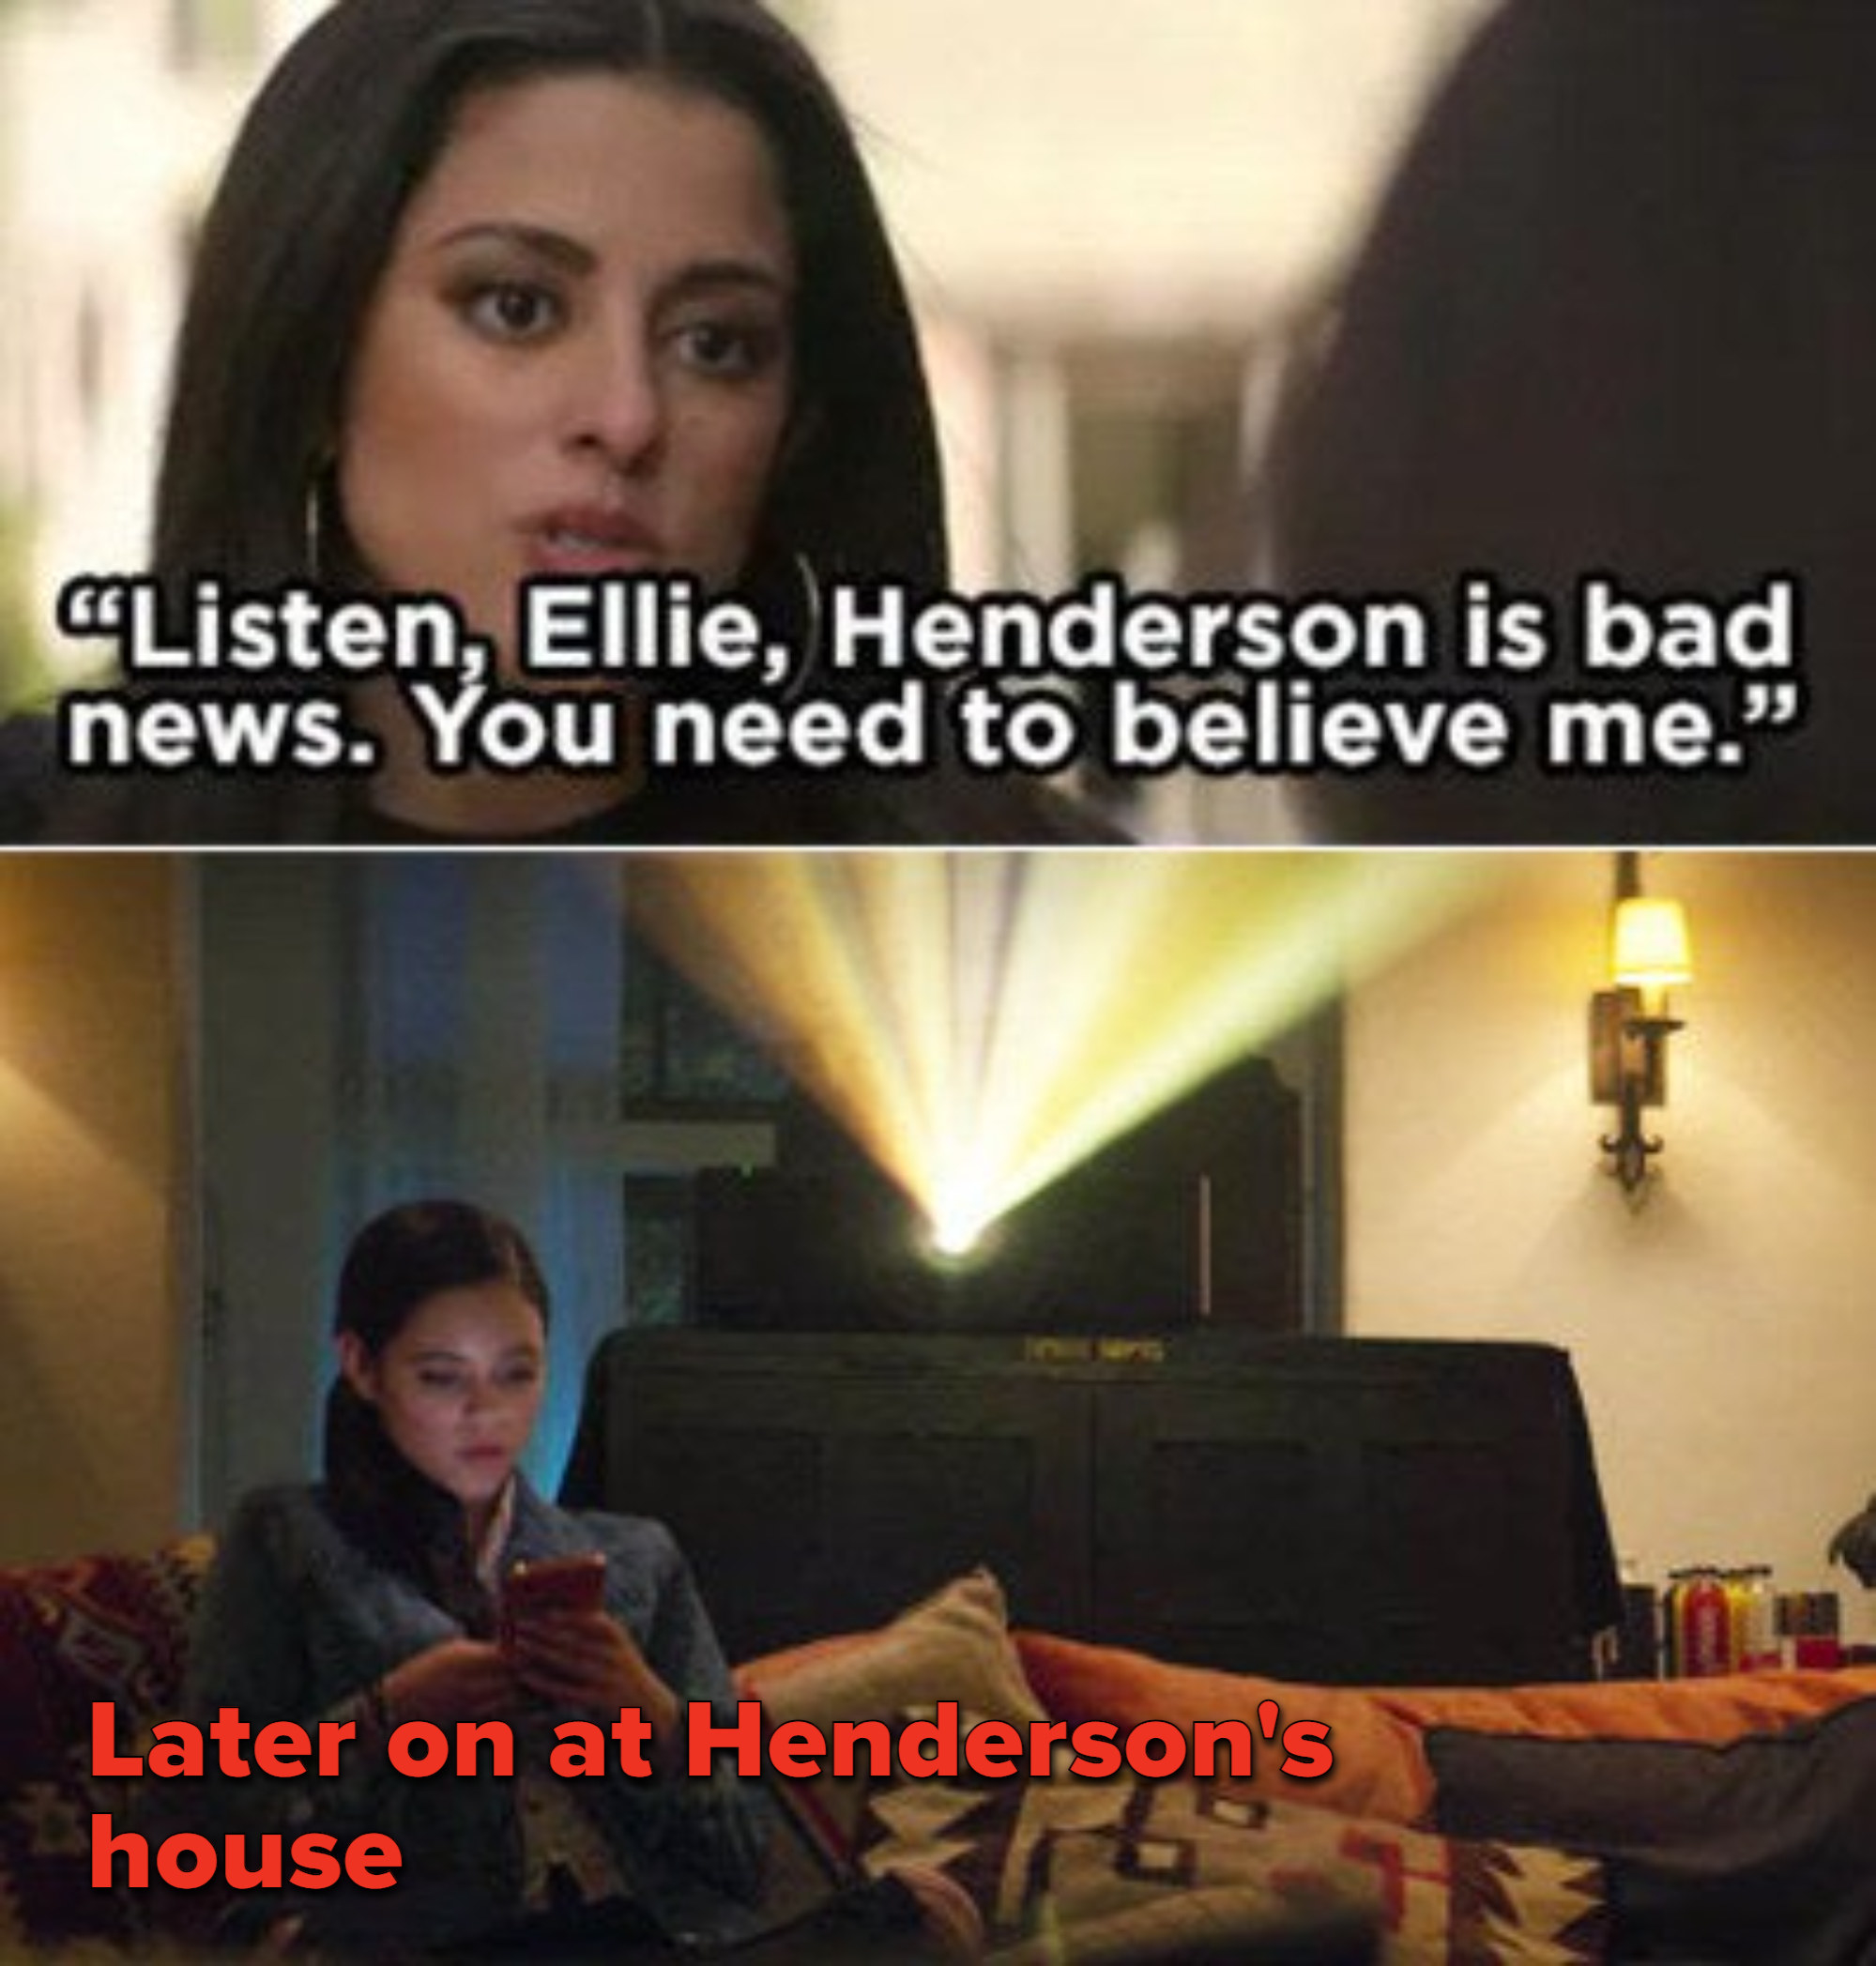 Delilah telling Ellie that Henderson is a bad guy and then Ellie going to his house later